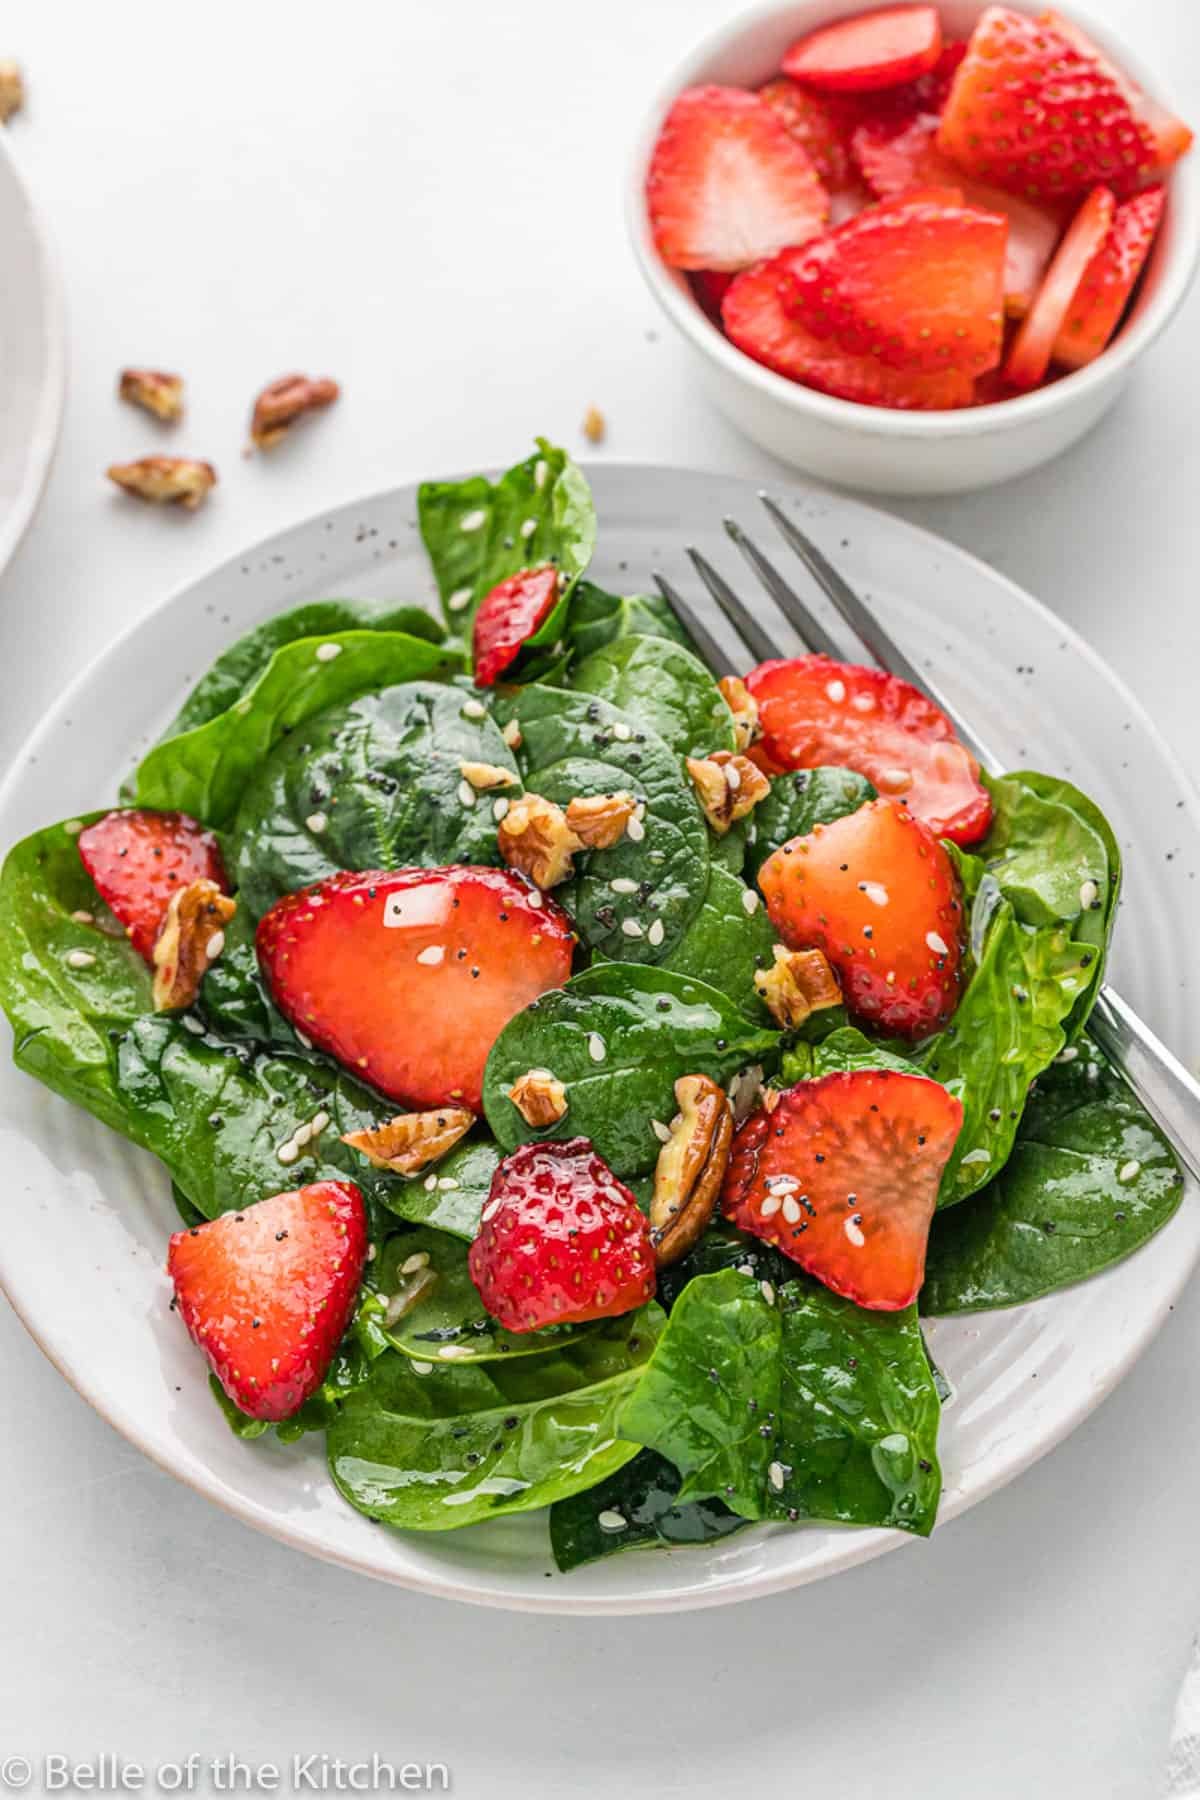 best salads for weight loss, 50 Best Salads For Weight Loss!